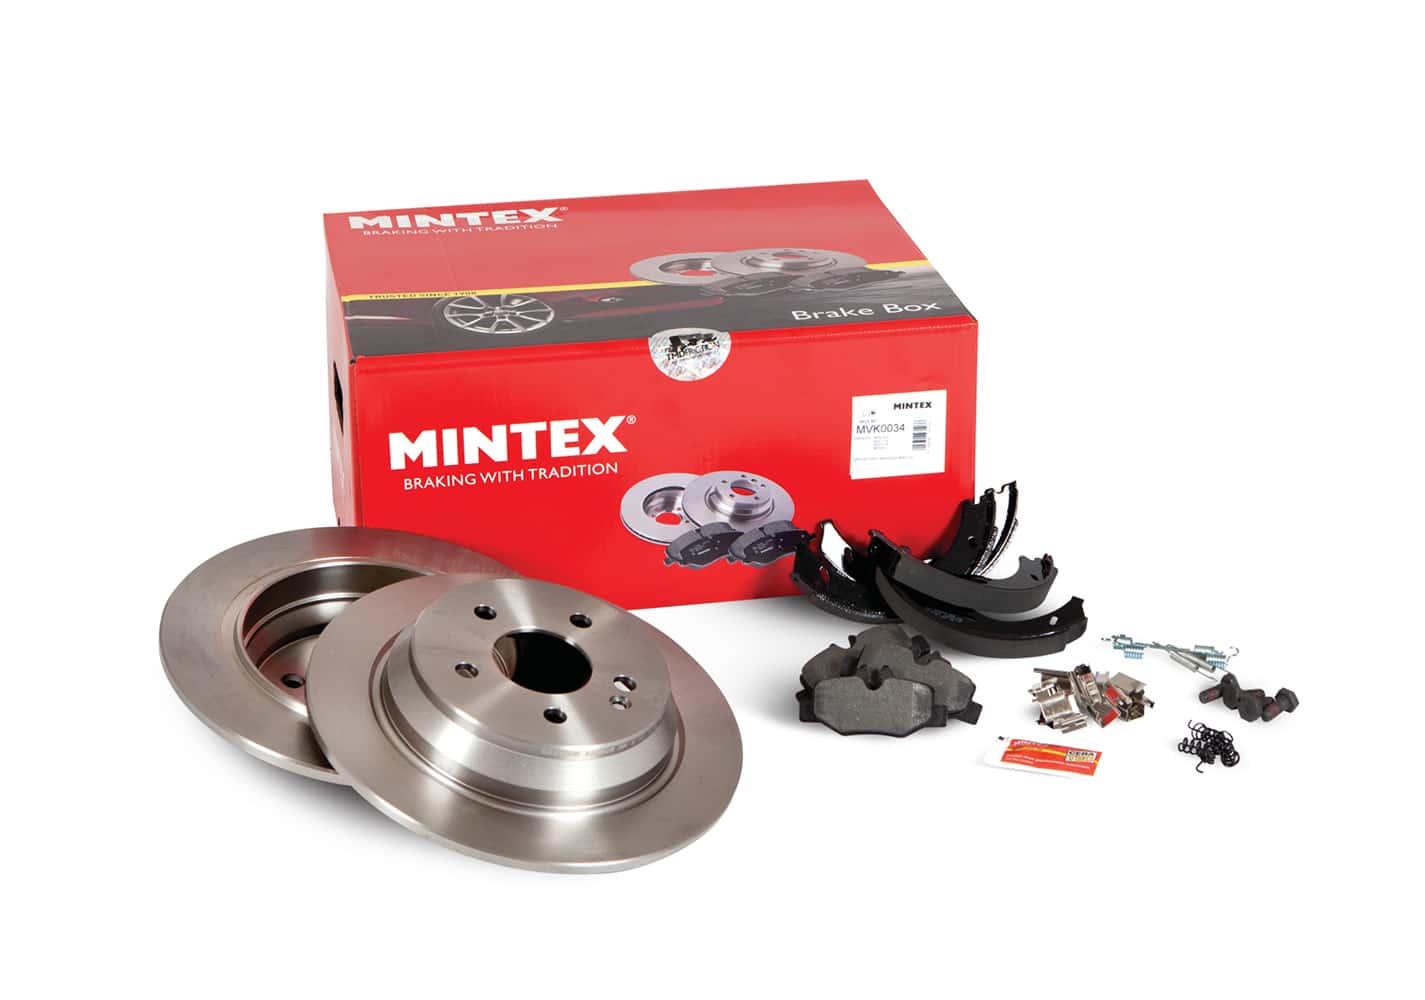 Mintex has expanded its range by six new disc references